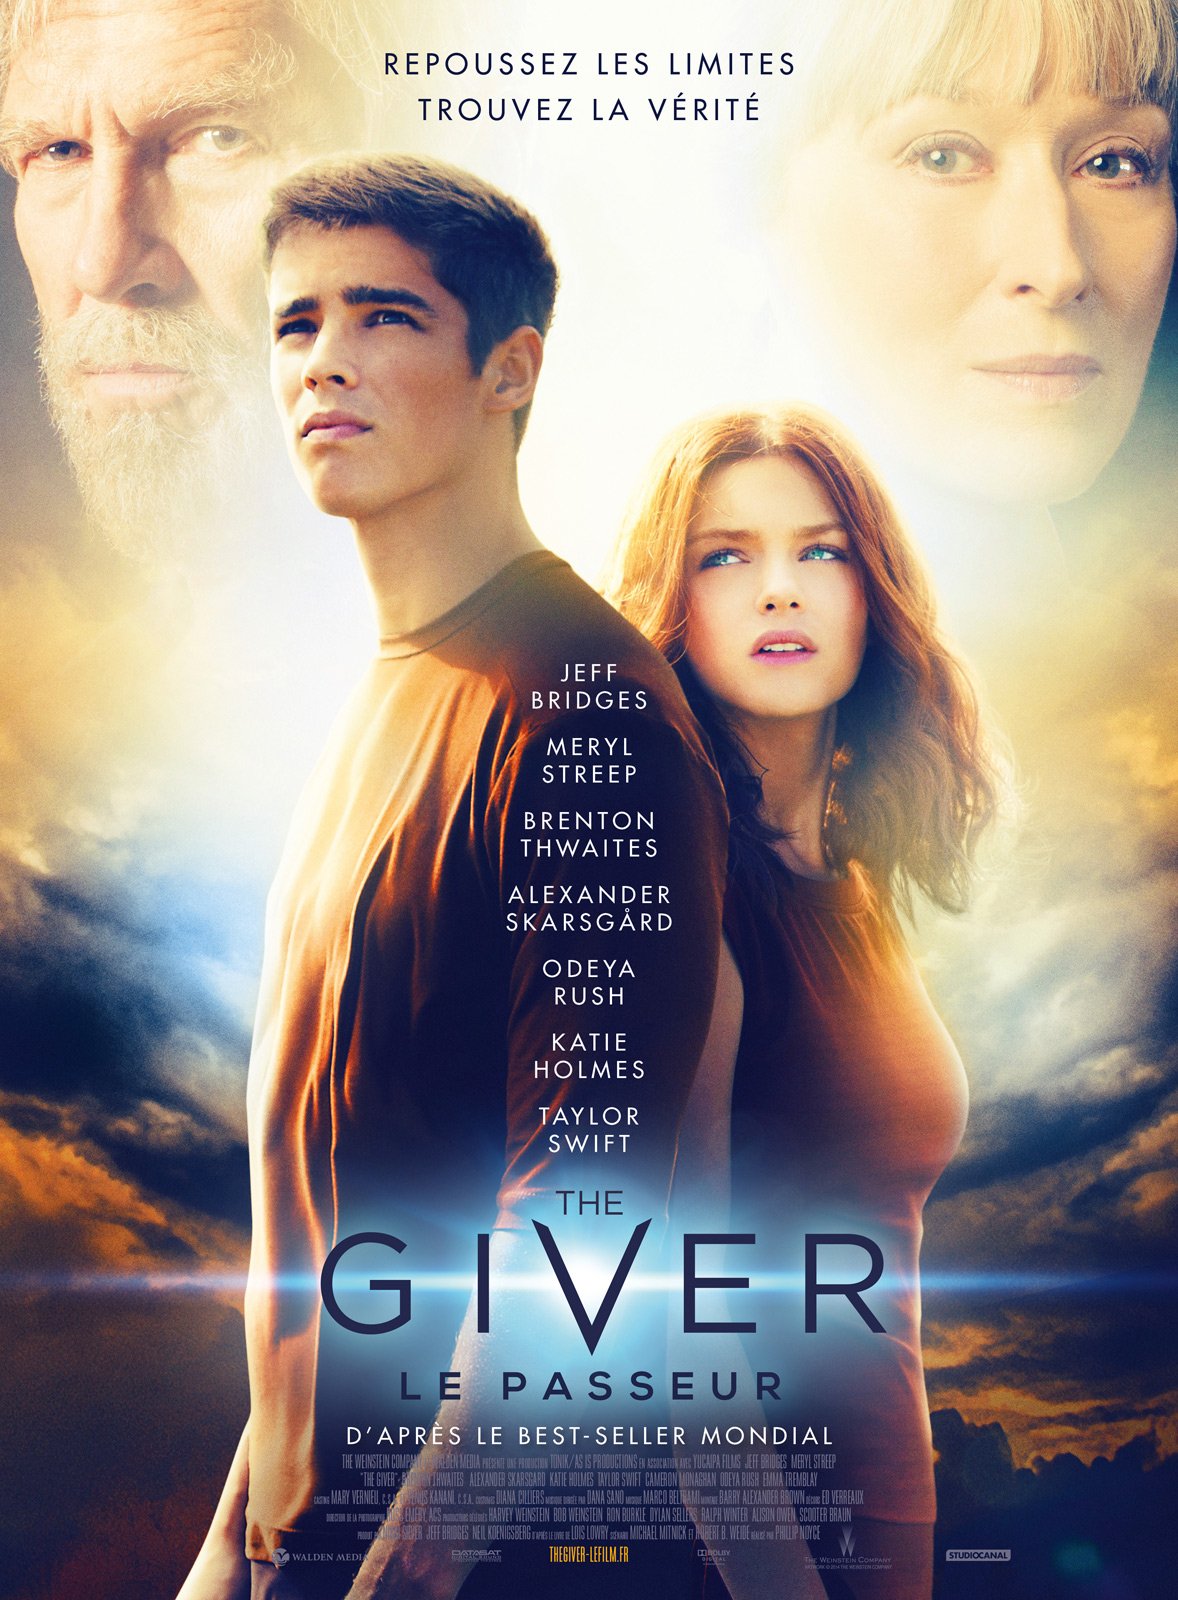 Resume of the giver